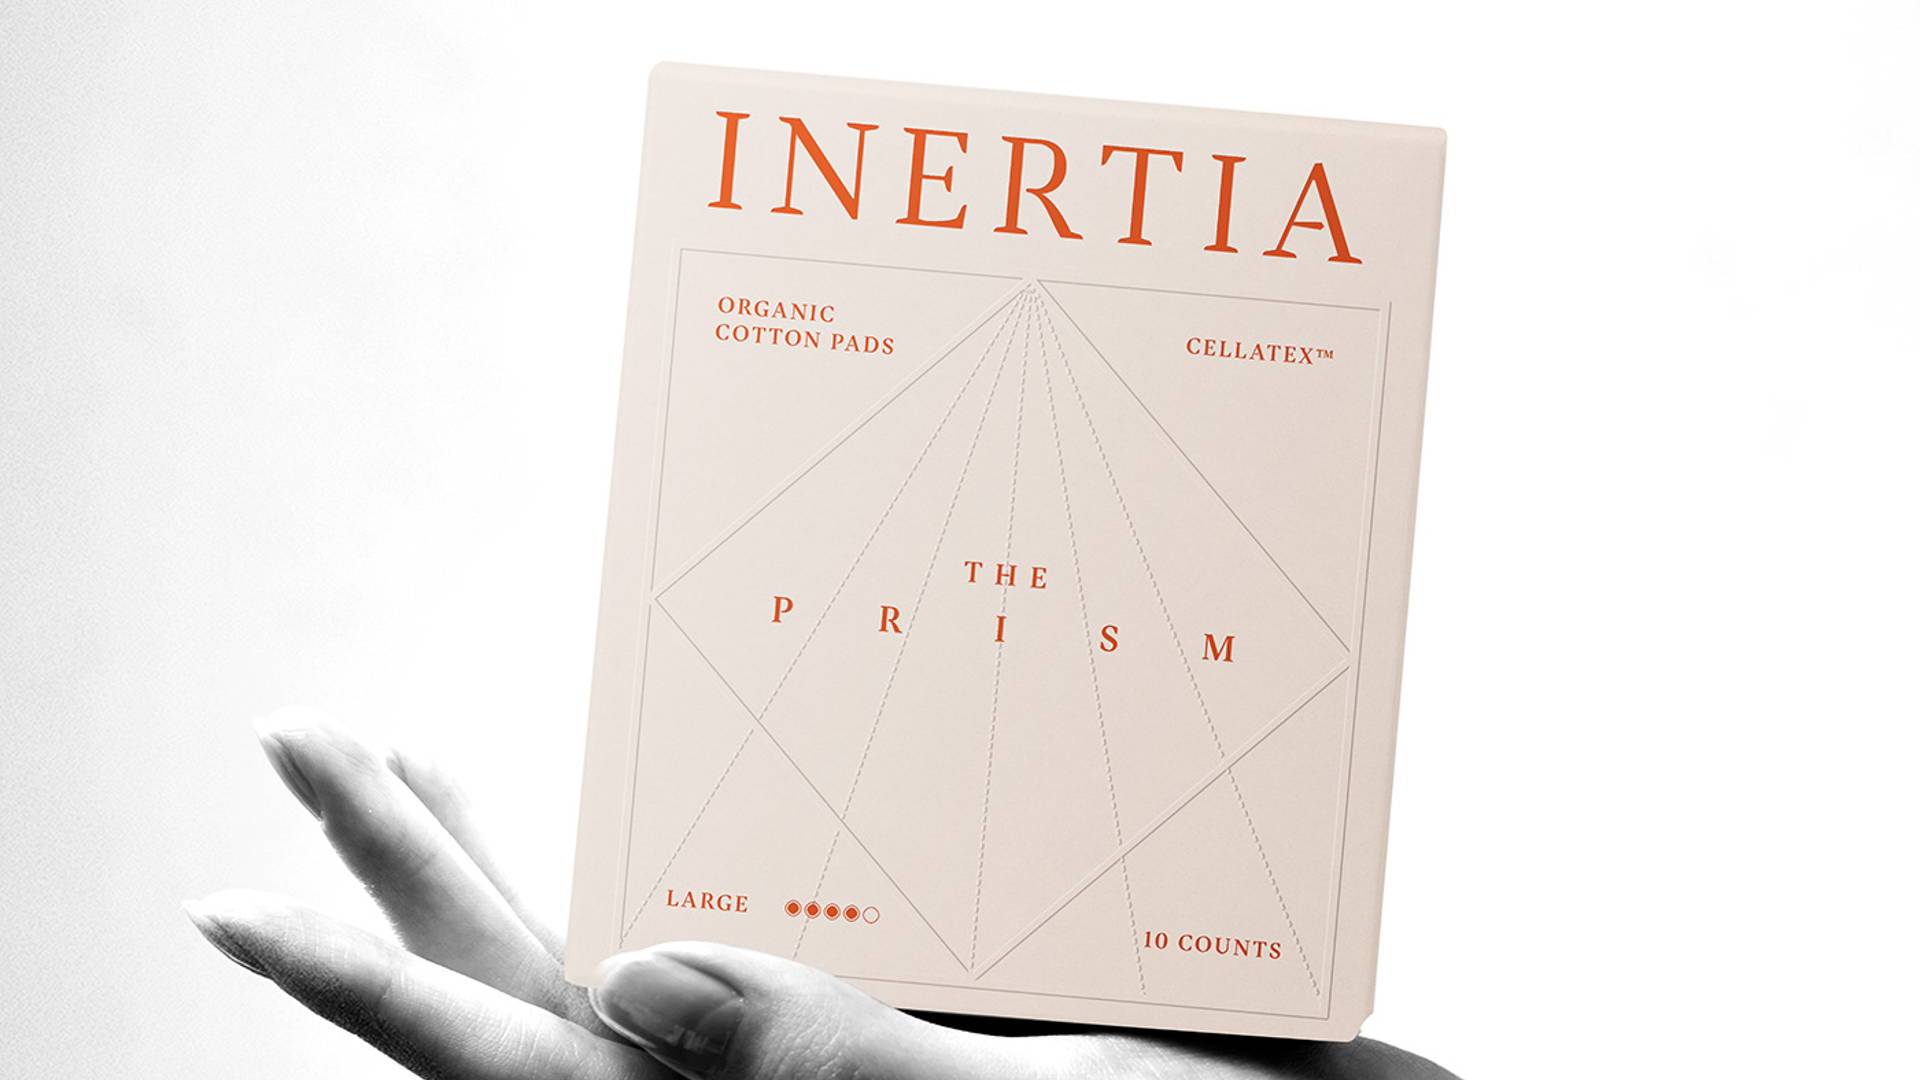 Featured image for Inertia Is A Cotton Pad Brand With Packaging That Finally Doesn't Look Generic